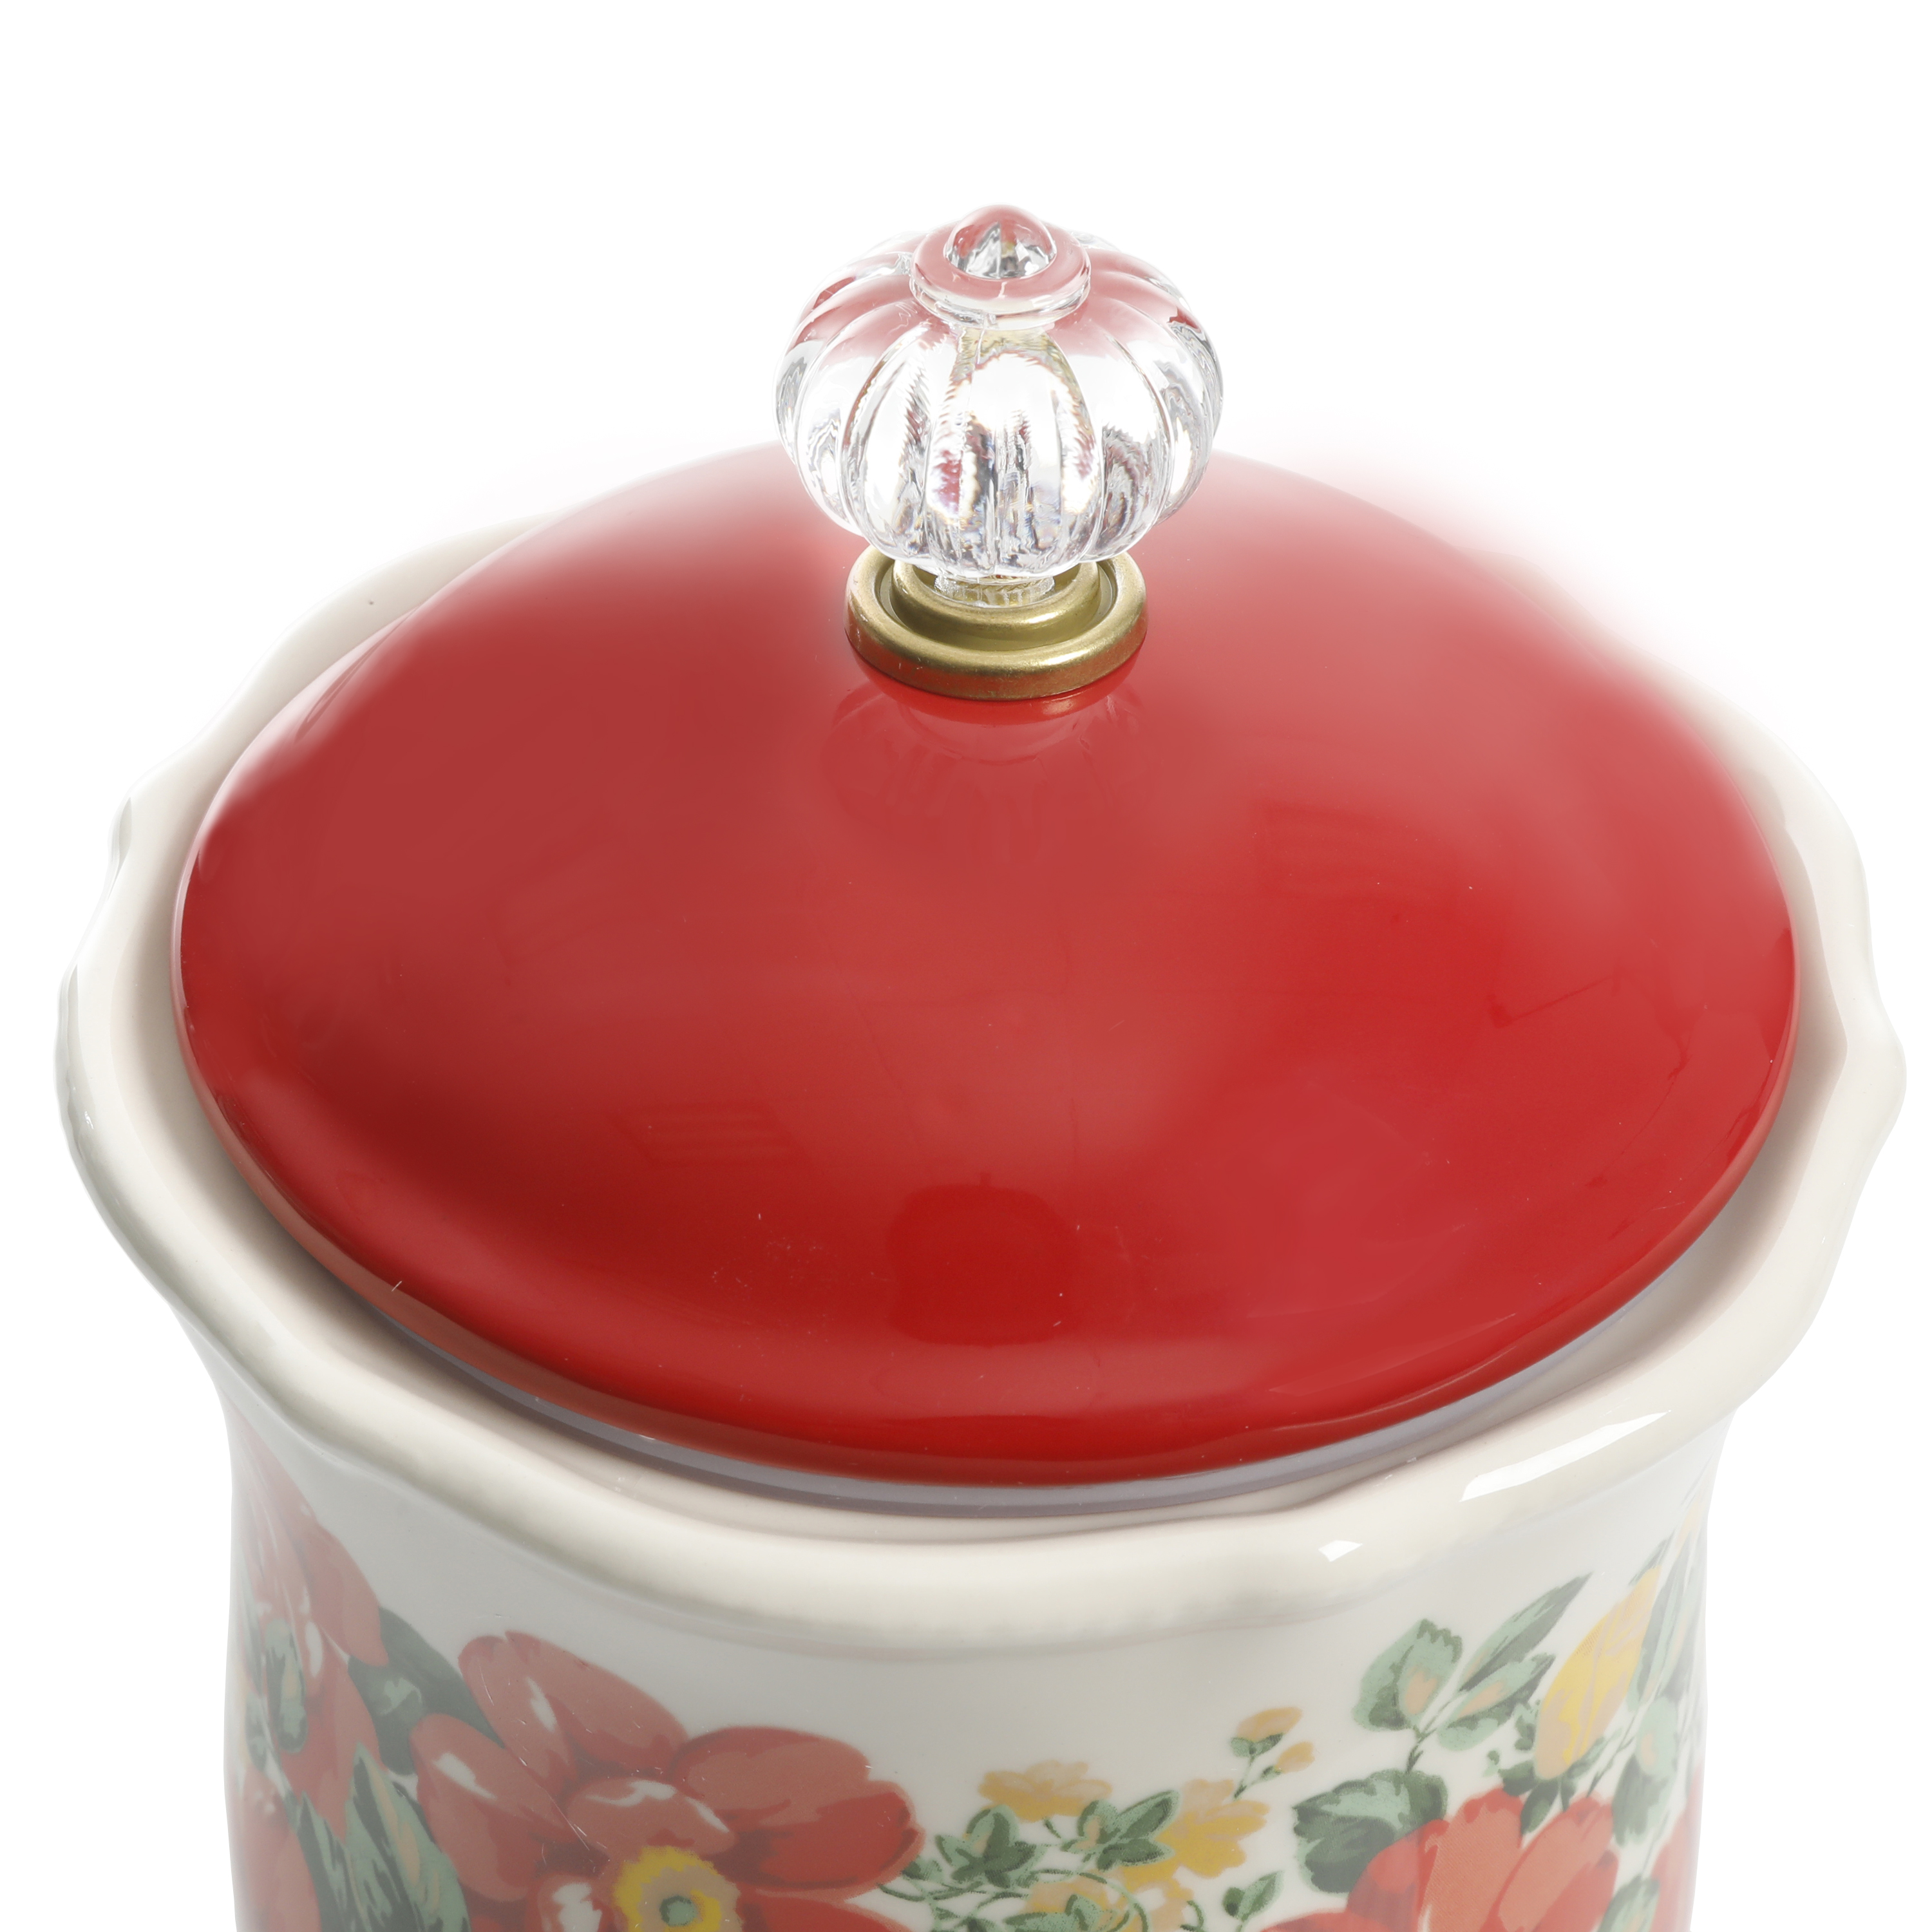 The Pioneer Woman Vintage Floral Canister with Acrylic Knob, 10" - image 5 of 5